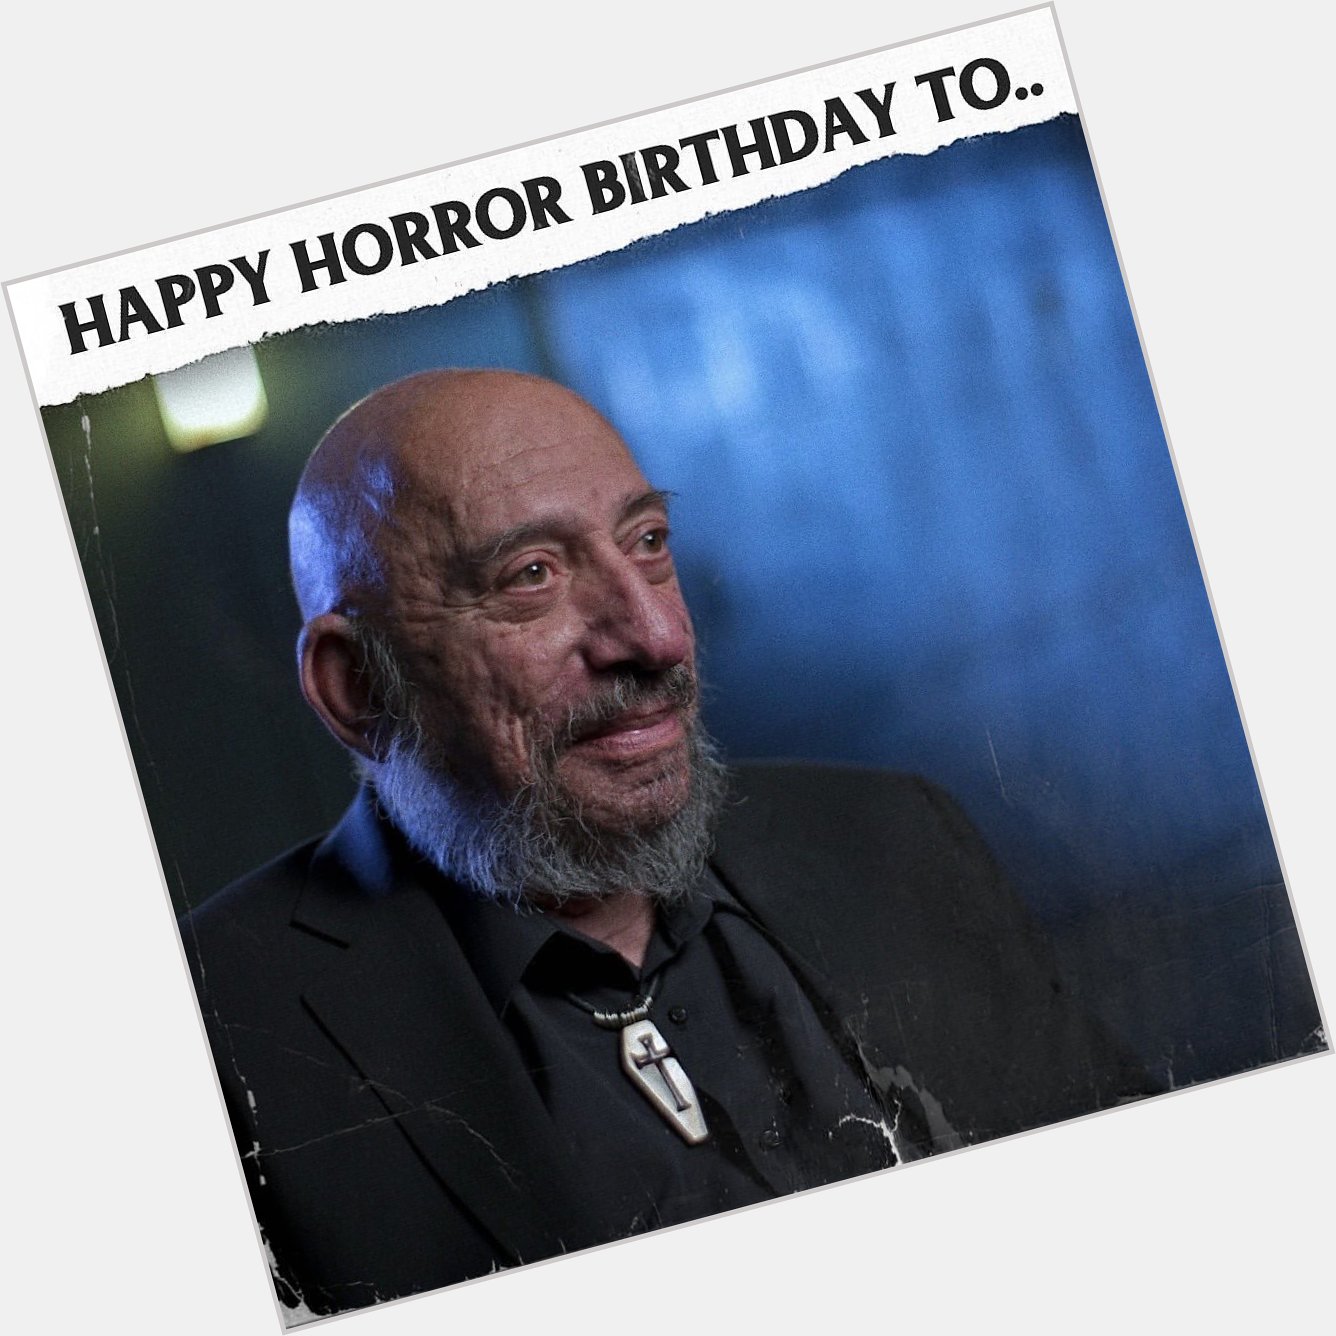 Happy Horror Birthday to the late SID HAIG - born in 1939 